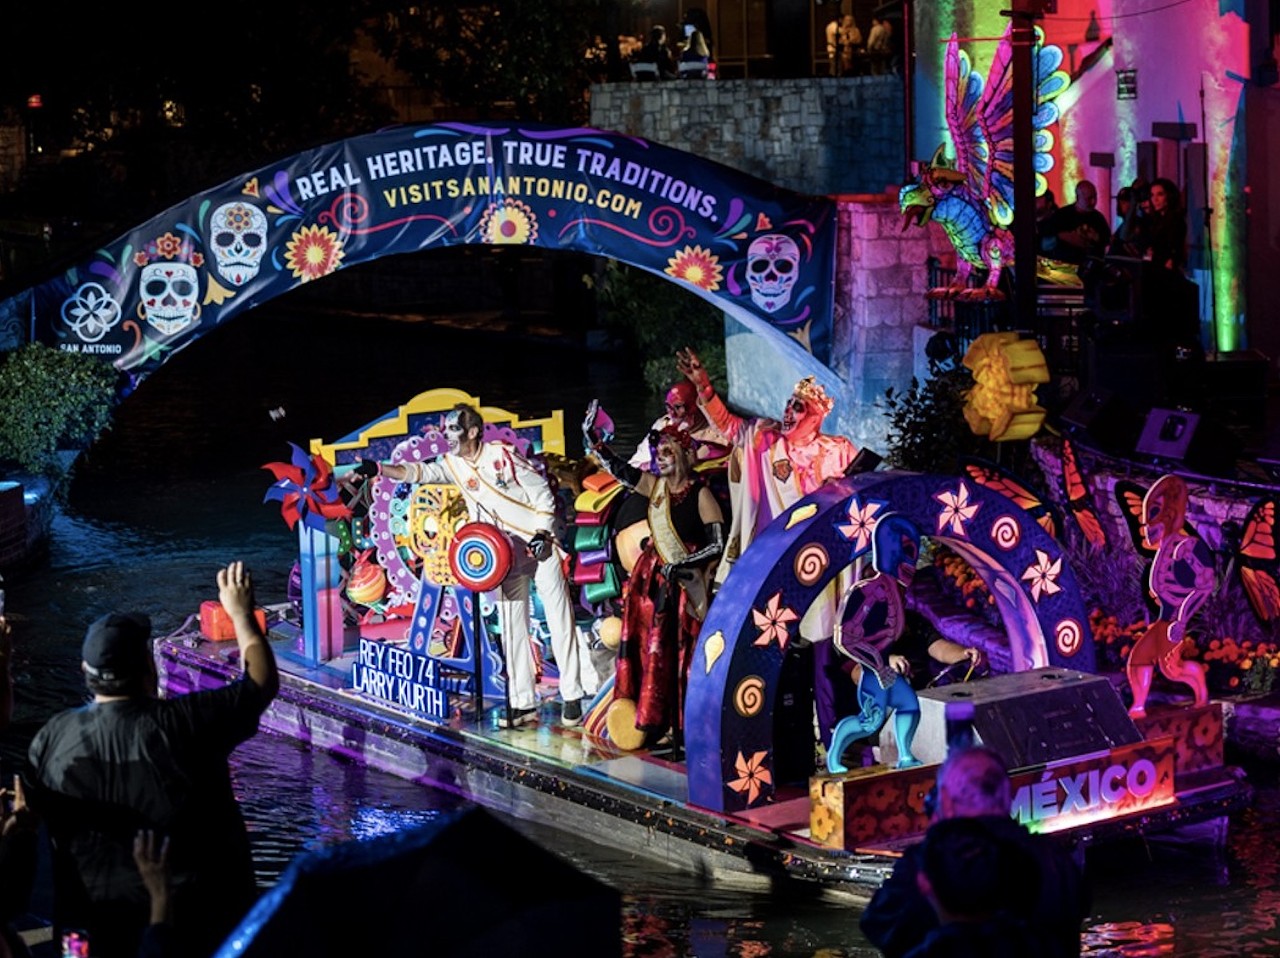 Mark the holidays by attending a river parade
St. Patrick’s Day, Pride, the Fourth of July, Día de los Muertos, Christmas — the Alamo City marks major occasions year round by floating decorated barges down the San Antonio River. Celebrate your fav holidays by joining in on the action at the River Walk.